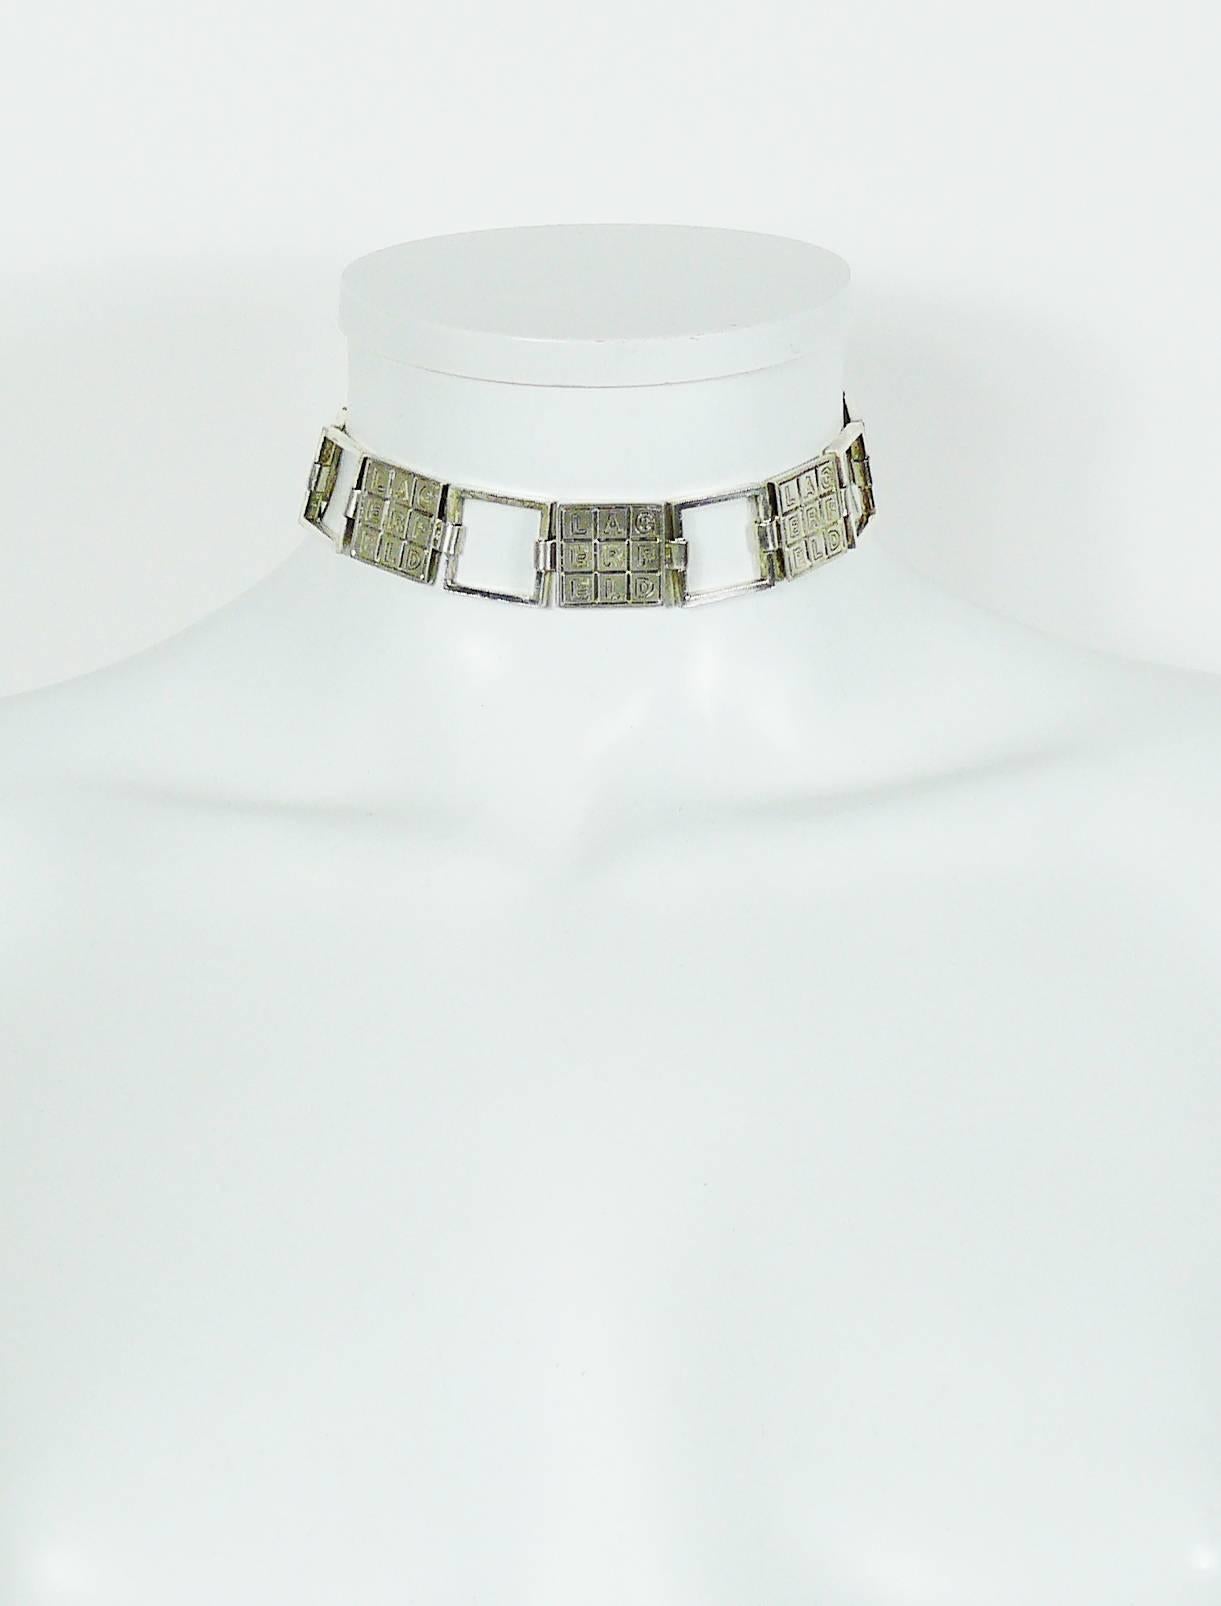 KARL LAGERFELD vintage silver toned crossword puzzle link necklace.

Lobster clasp closure.
Extension chain.

Indicative measurements : adjustable length from approx. 32 cm (12.60 inches) to approx. 36 cm (14.17 inches) / link width approx. 2 cm